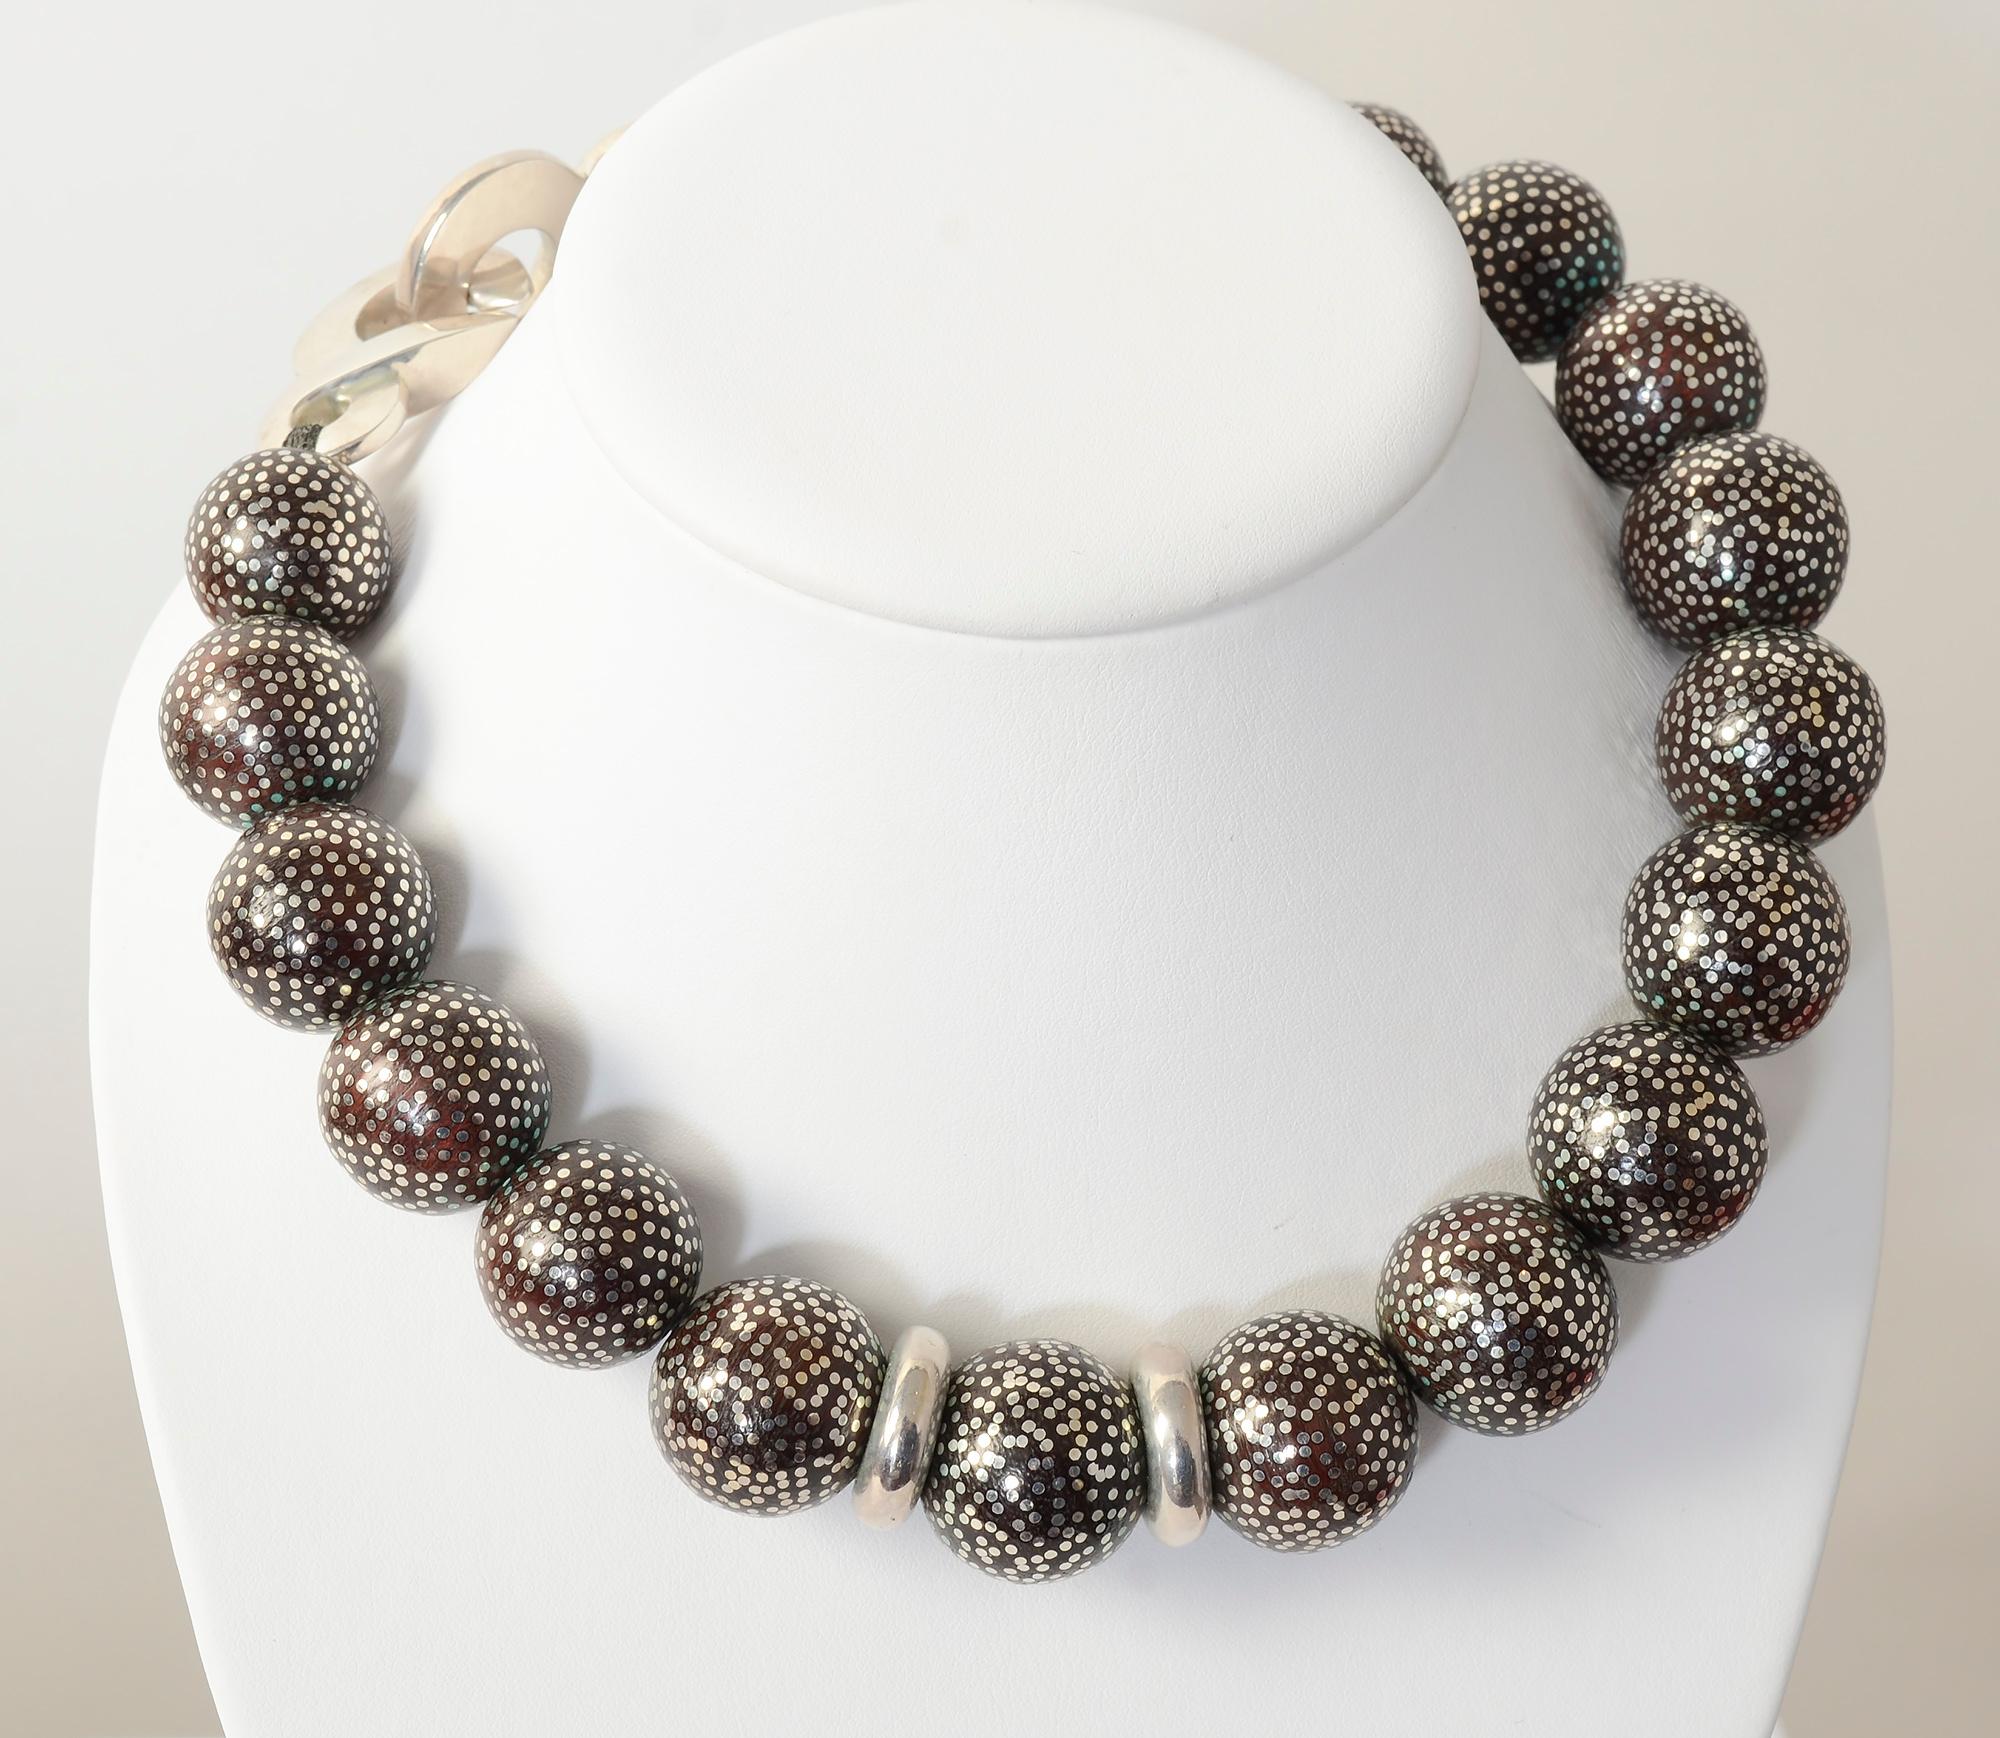 Dramatic wood bead necklace studded with tiny silver dots. The beads are approximately one inch in diameter but not exactly the same as they are handmade. The interlocking loops of the clasp are ornamental enough to be worn in the front or back.